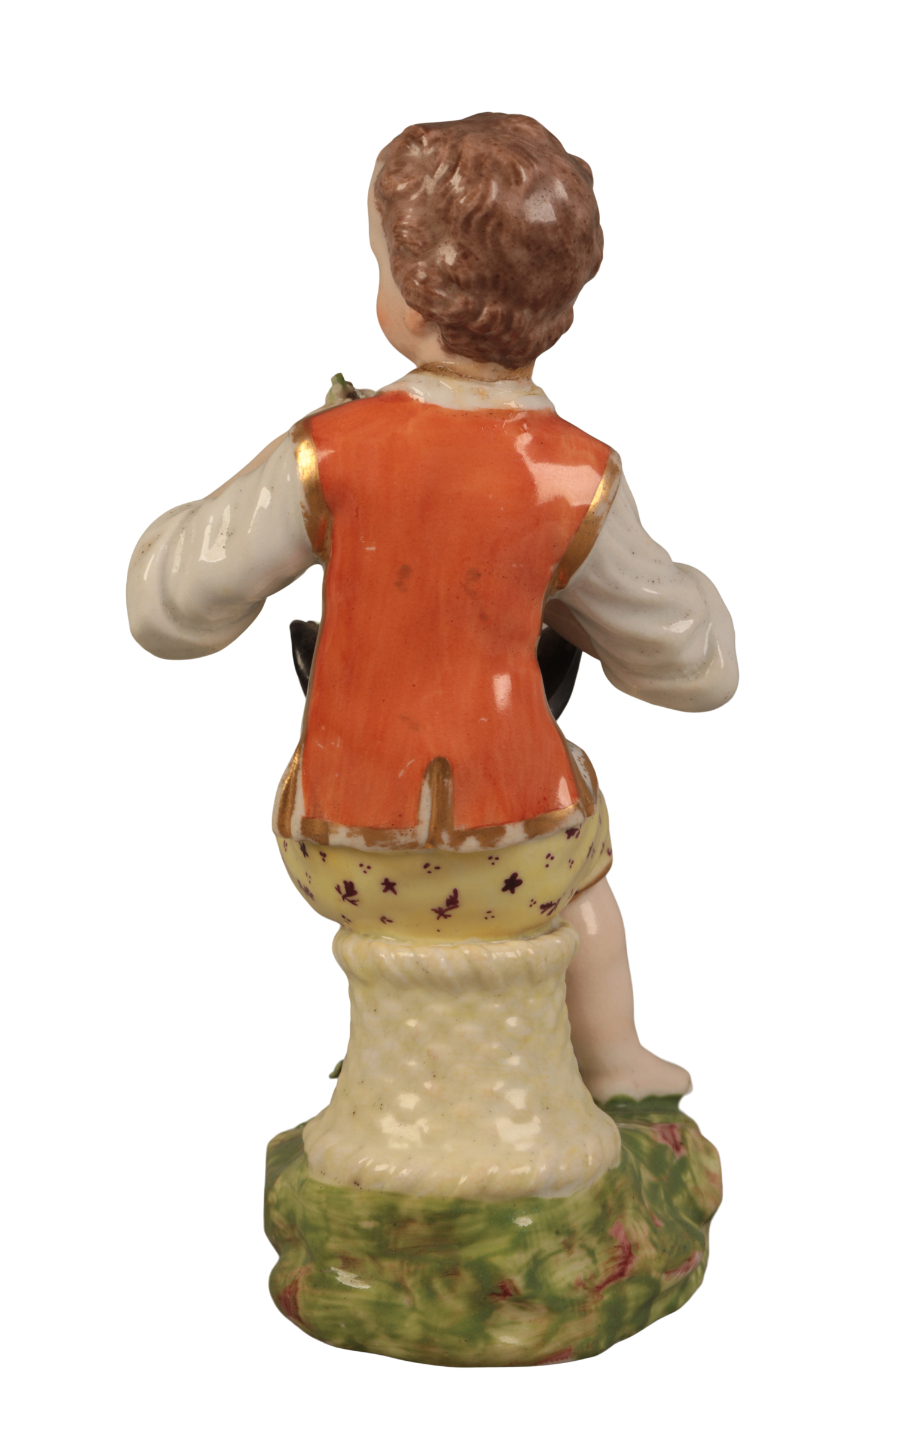 A DERBY PORCELAIN FIGURE OF A SEATED GARDENER - Image 2 of 2